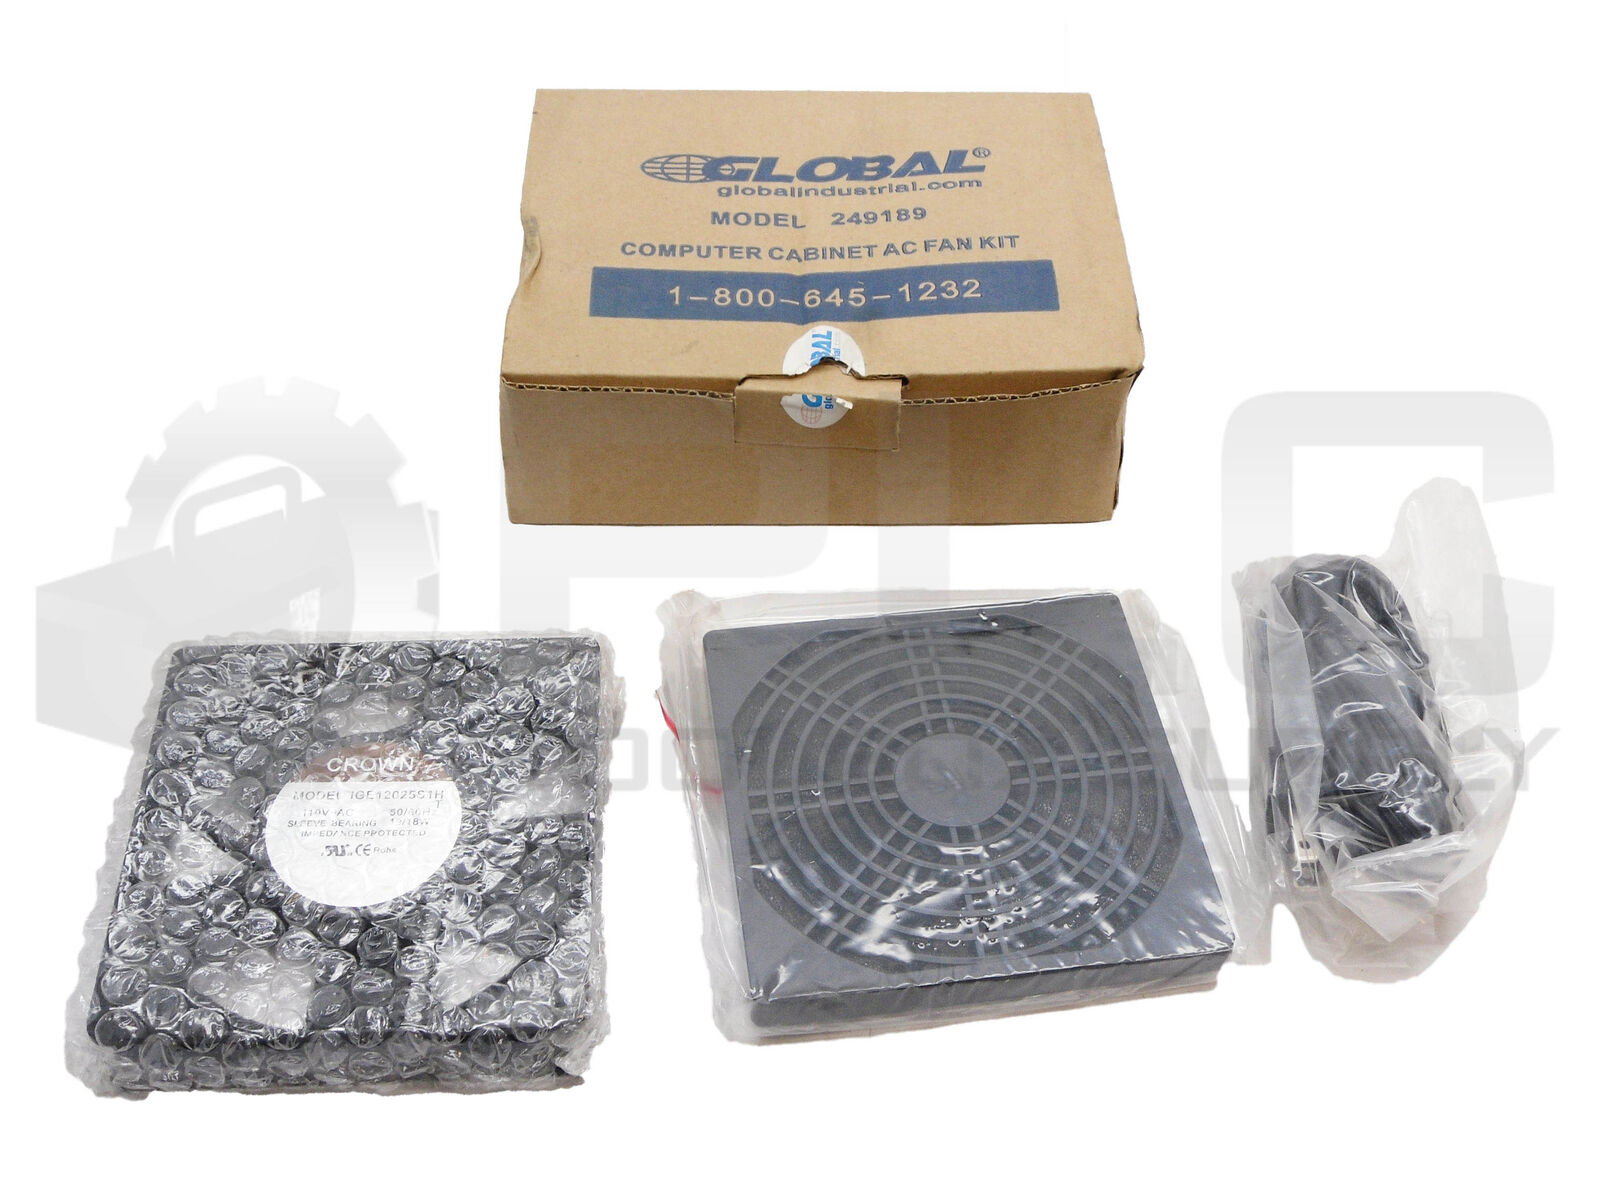 NEW GLOBAL INDUSTRIAL 249189 COMPUTER CABINET AC FAN KIT IGE12025S1H